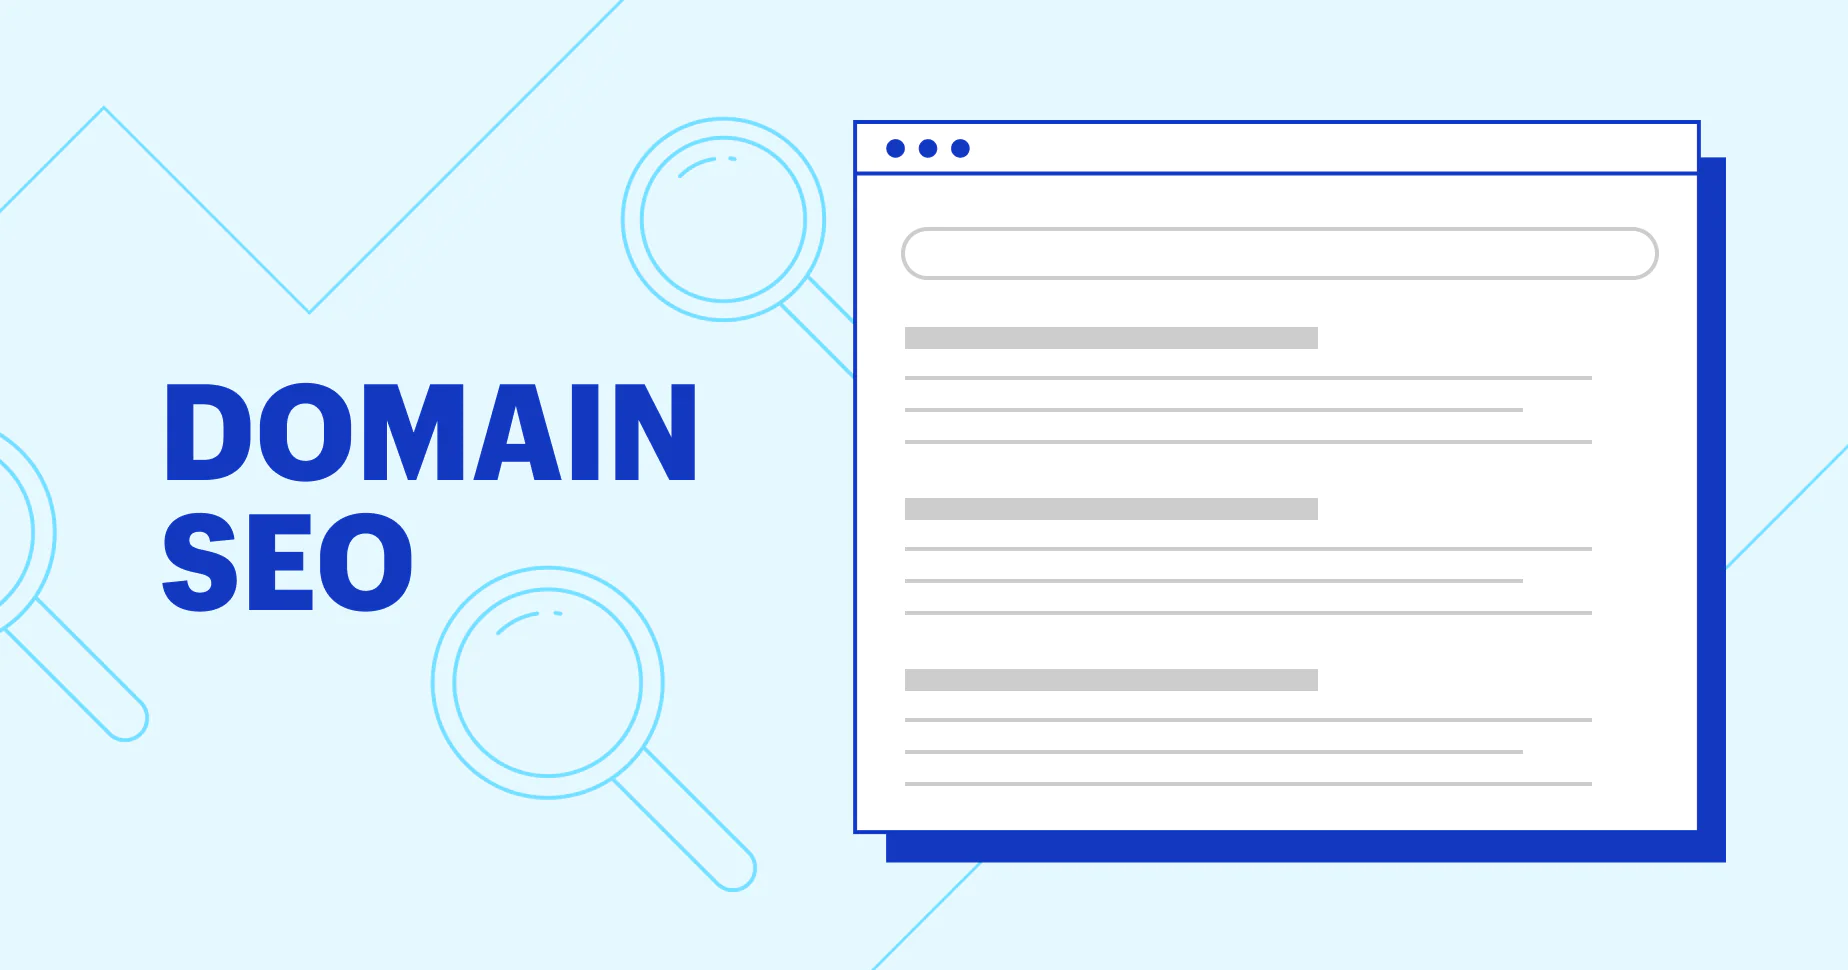 A document with the words DOMAIN SEO